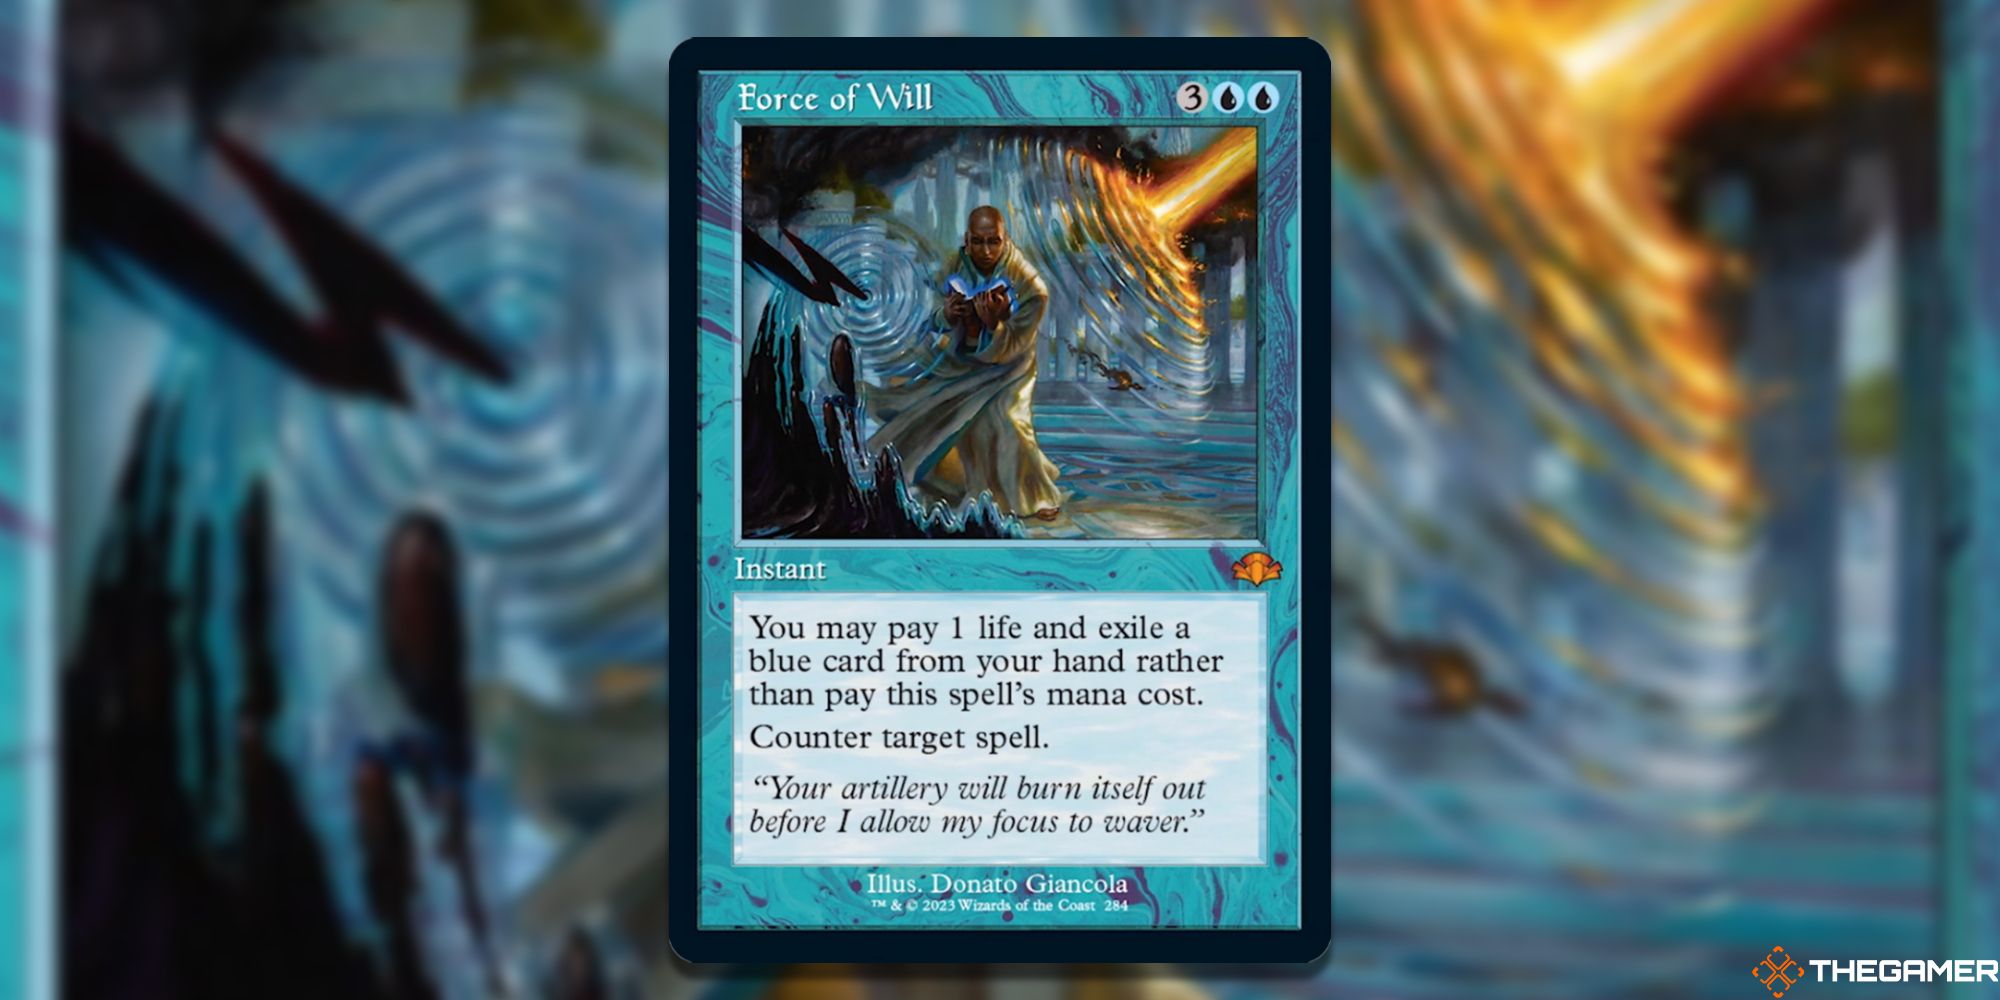  Image of the Force of Will Retro Frame card in Magic: The Gathering, with art by Donato Giancola